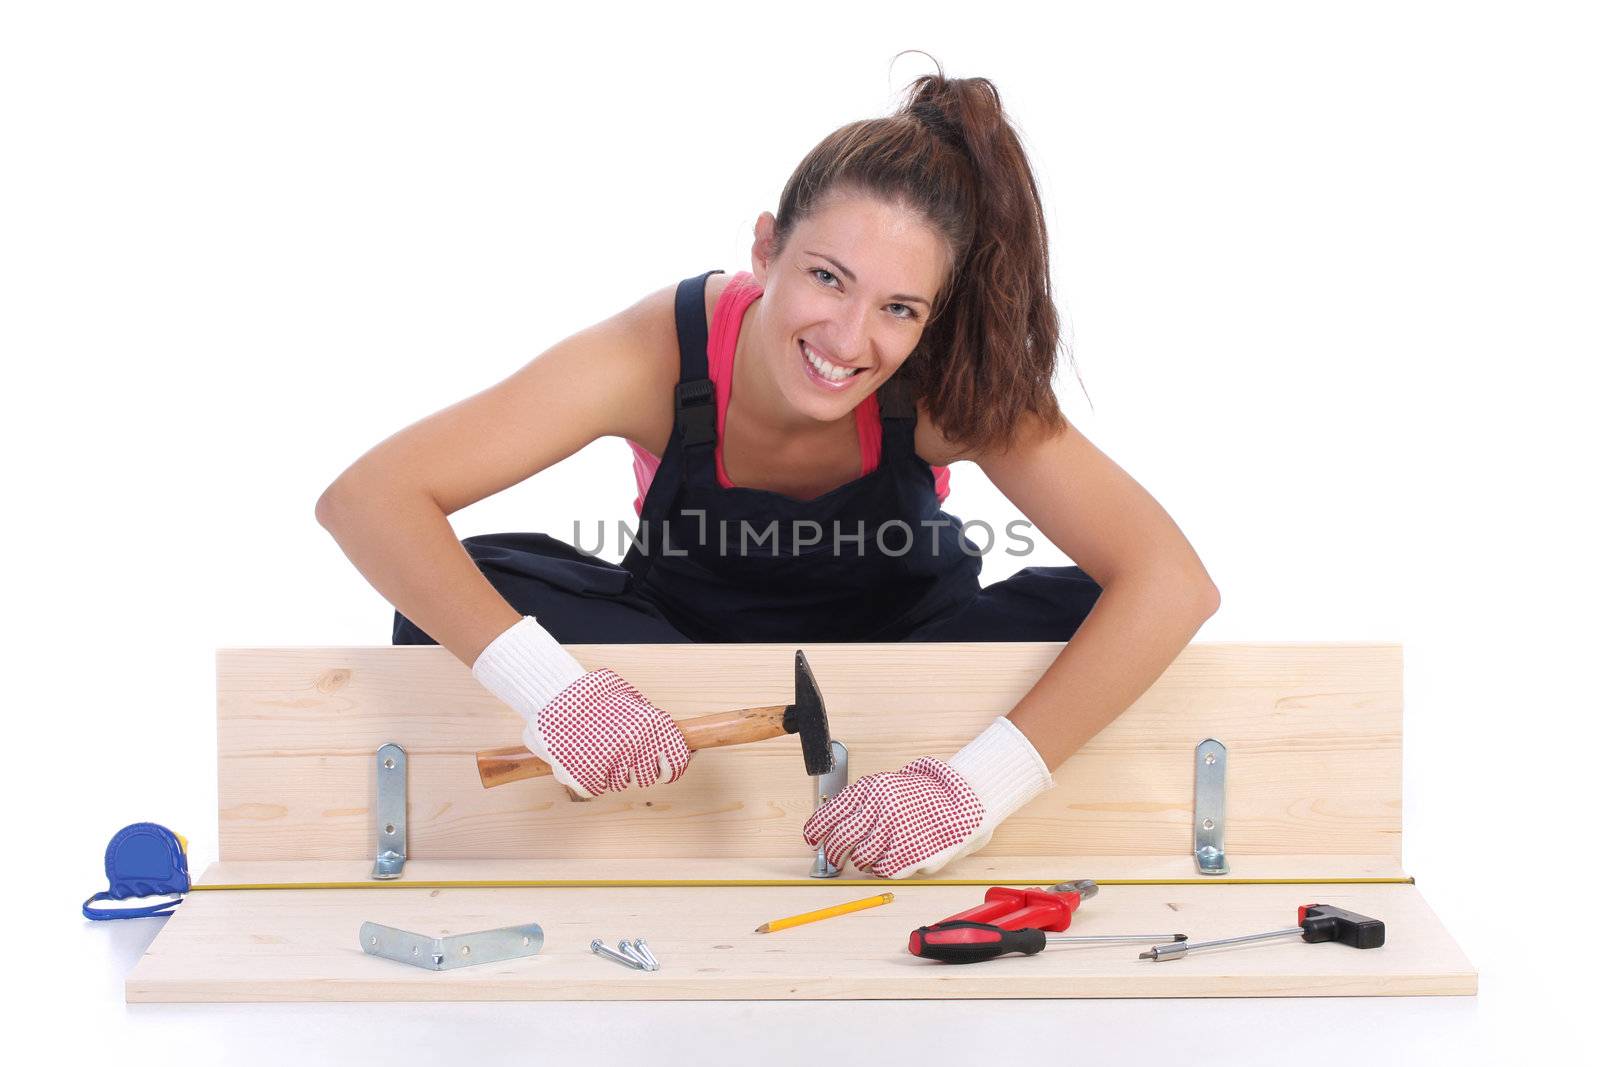 woman carpenter at work on white background 